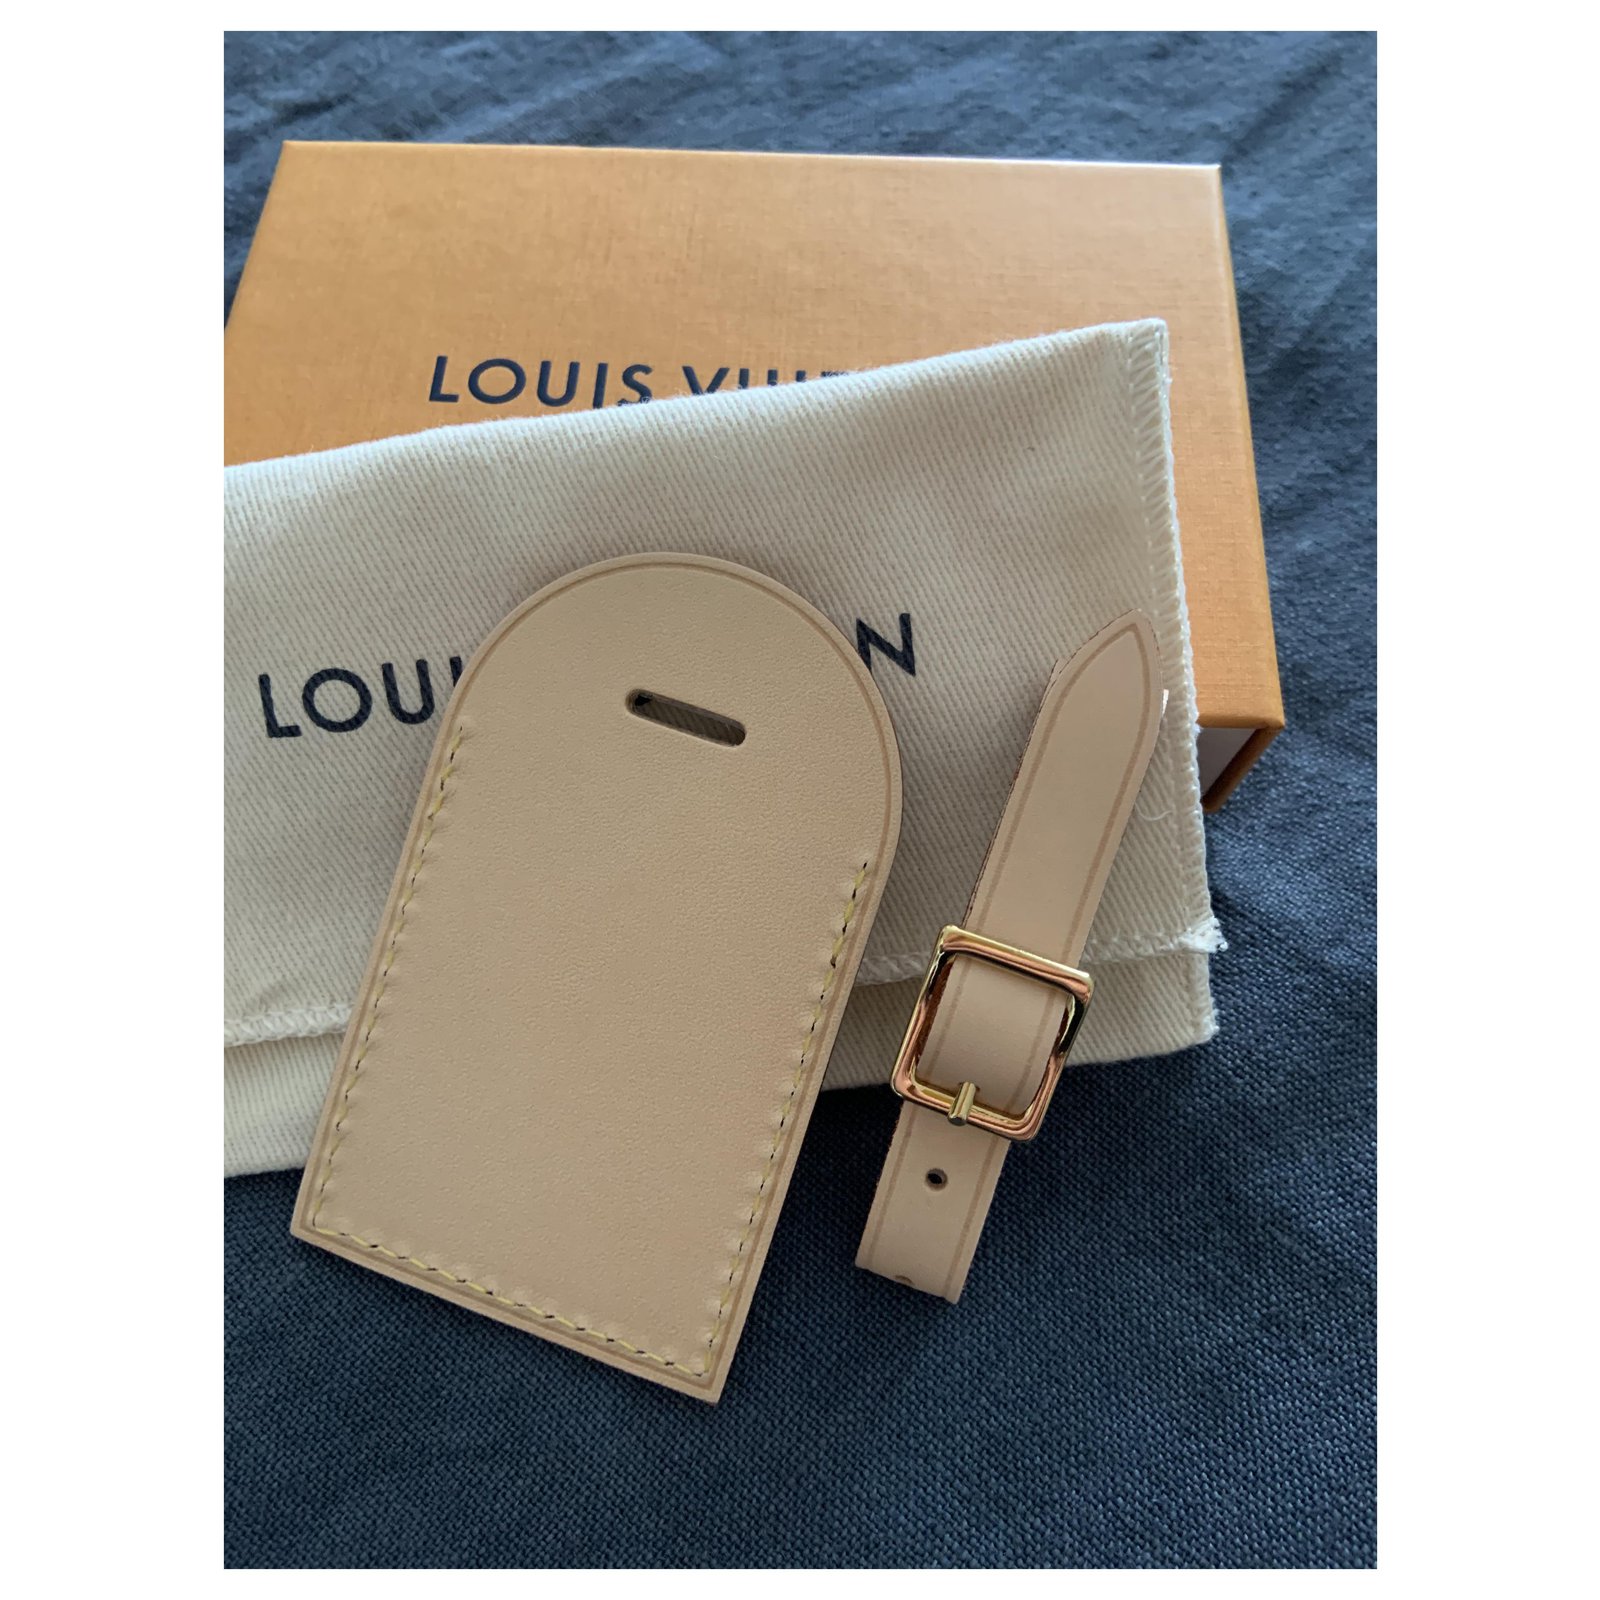 Louis Vuitton Vacchetta large size luggage tag hot stamped Hong